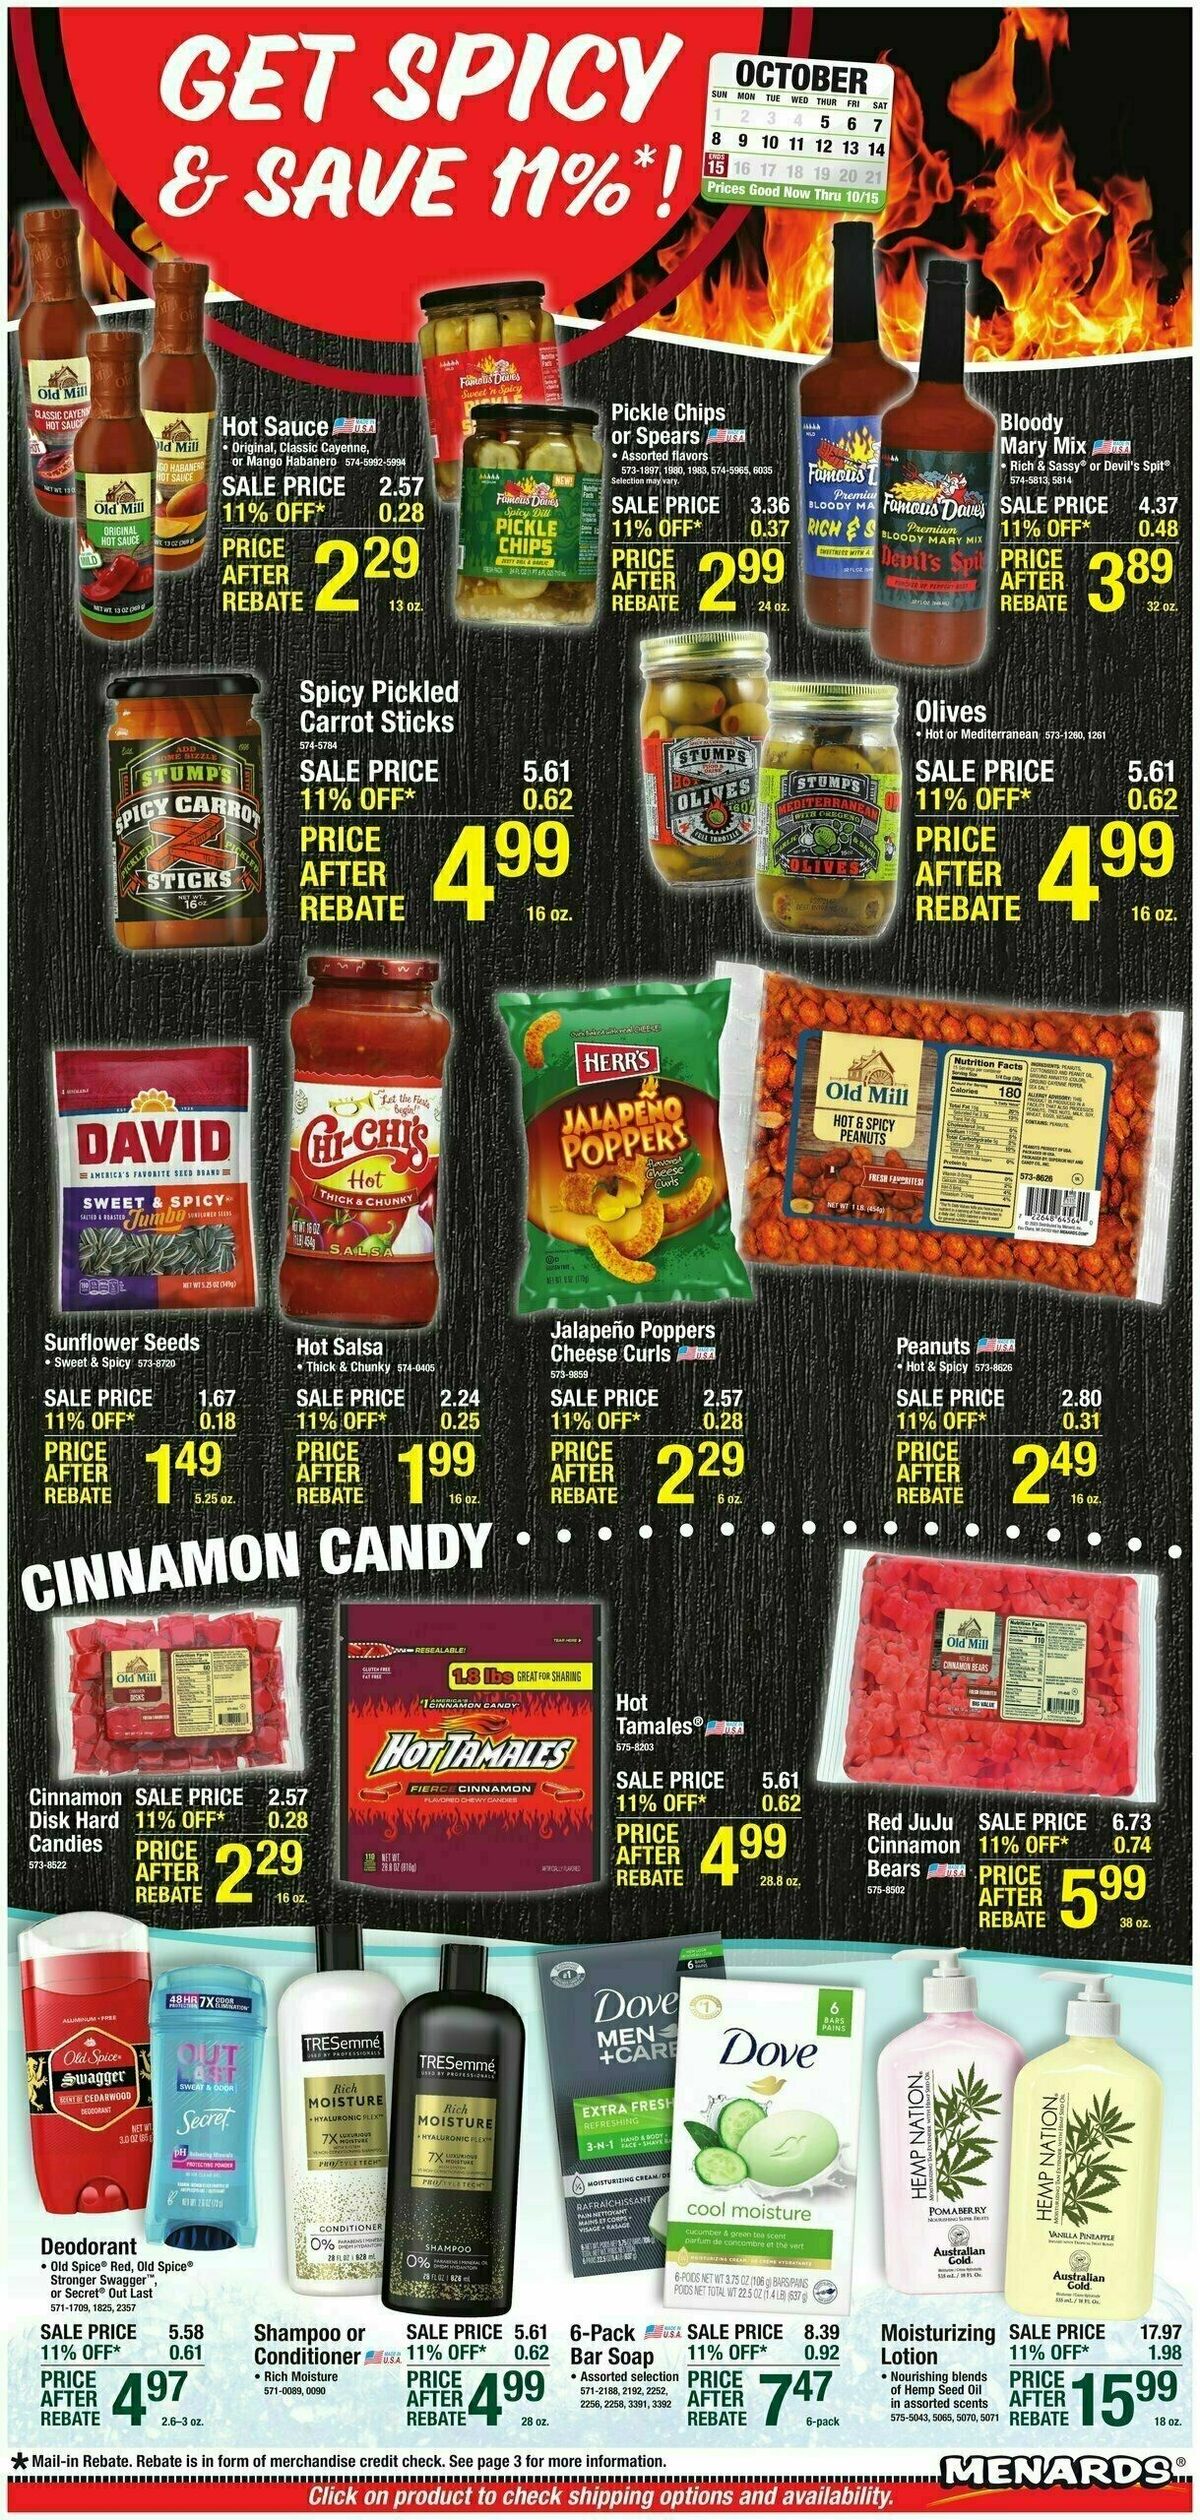 Menards Home Essentials Weekly Ad from October 4